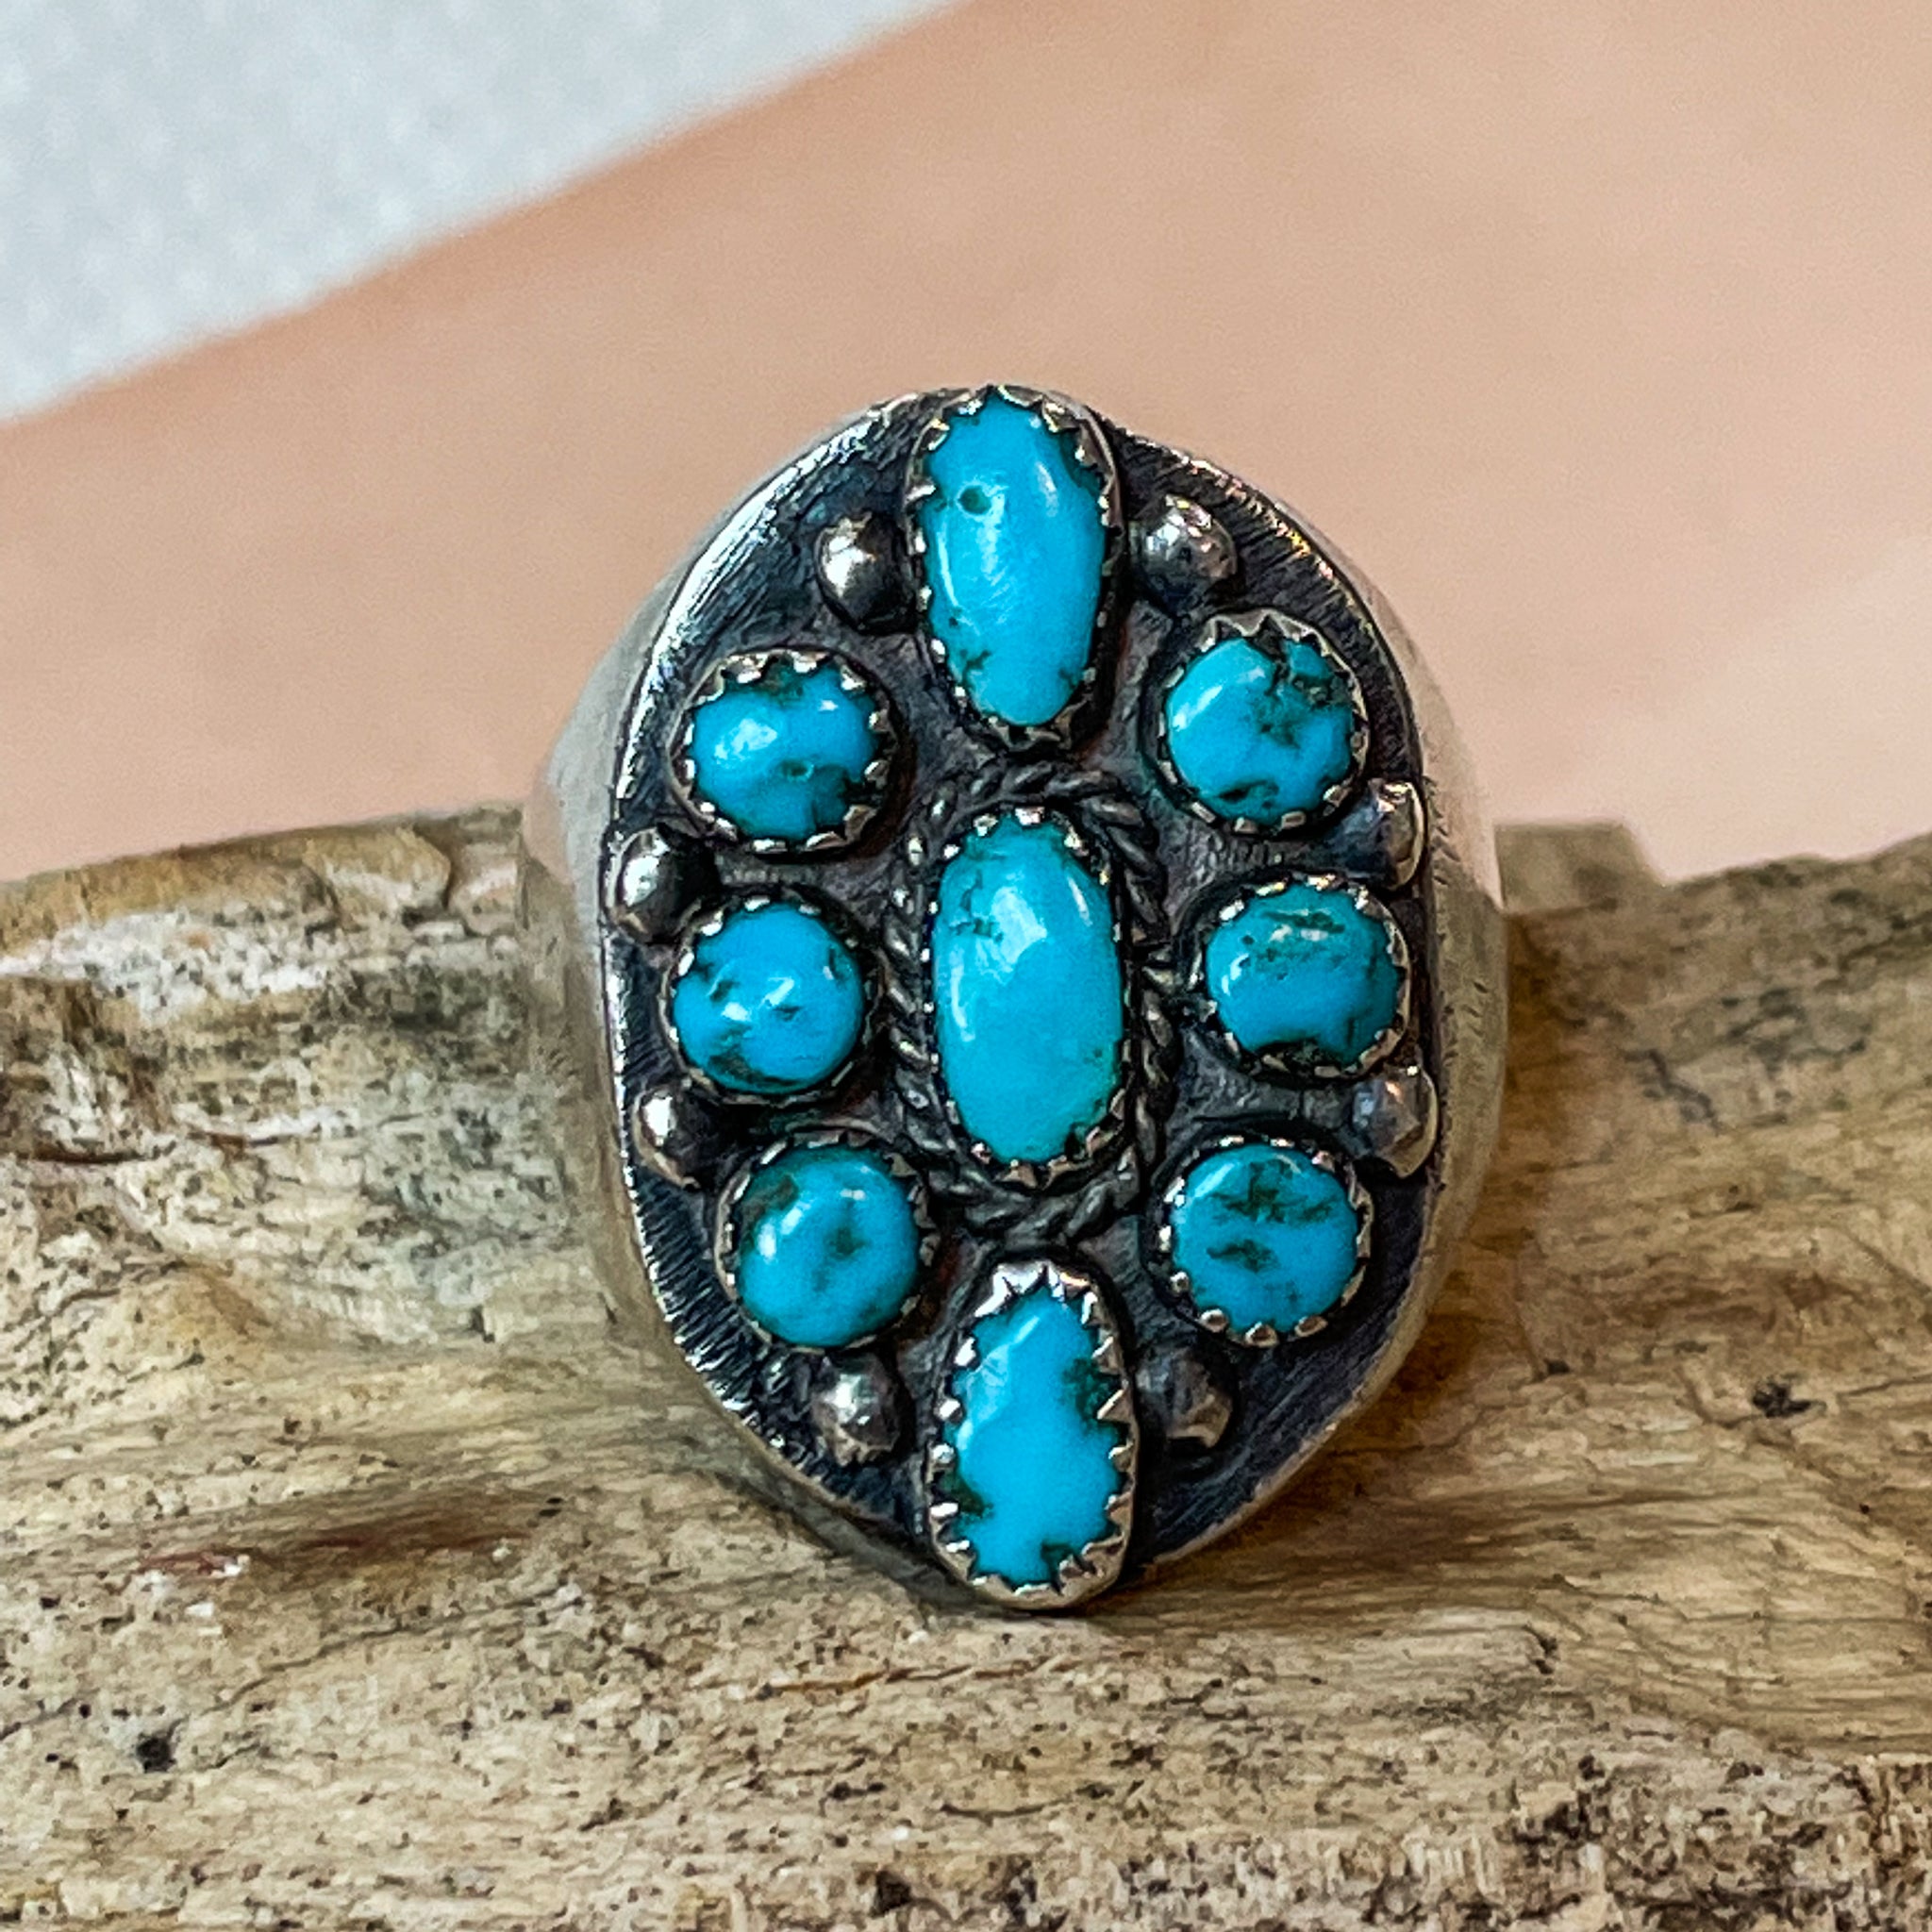 Navajo Large Triple-Stone Blue Bird Turquoise Engraved Sterling Silver Ring  - Bobby Johnson - Native American | Native American Jewelry